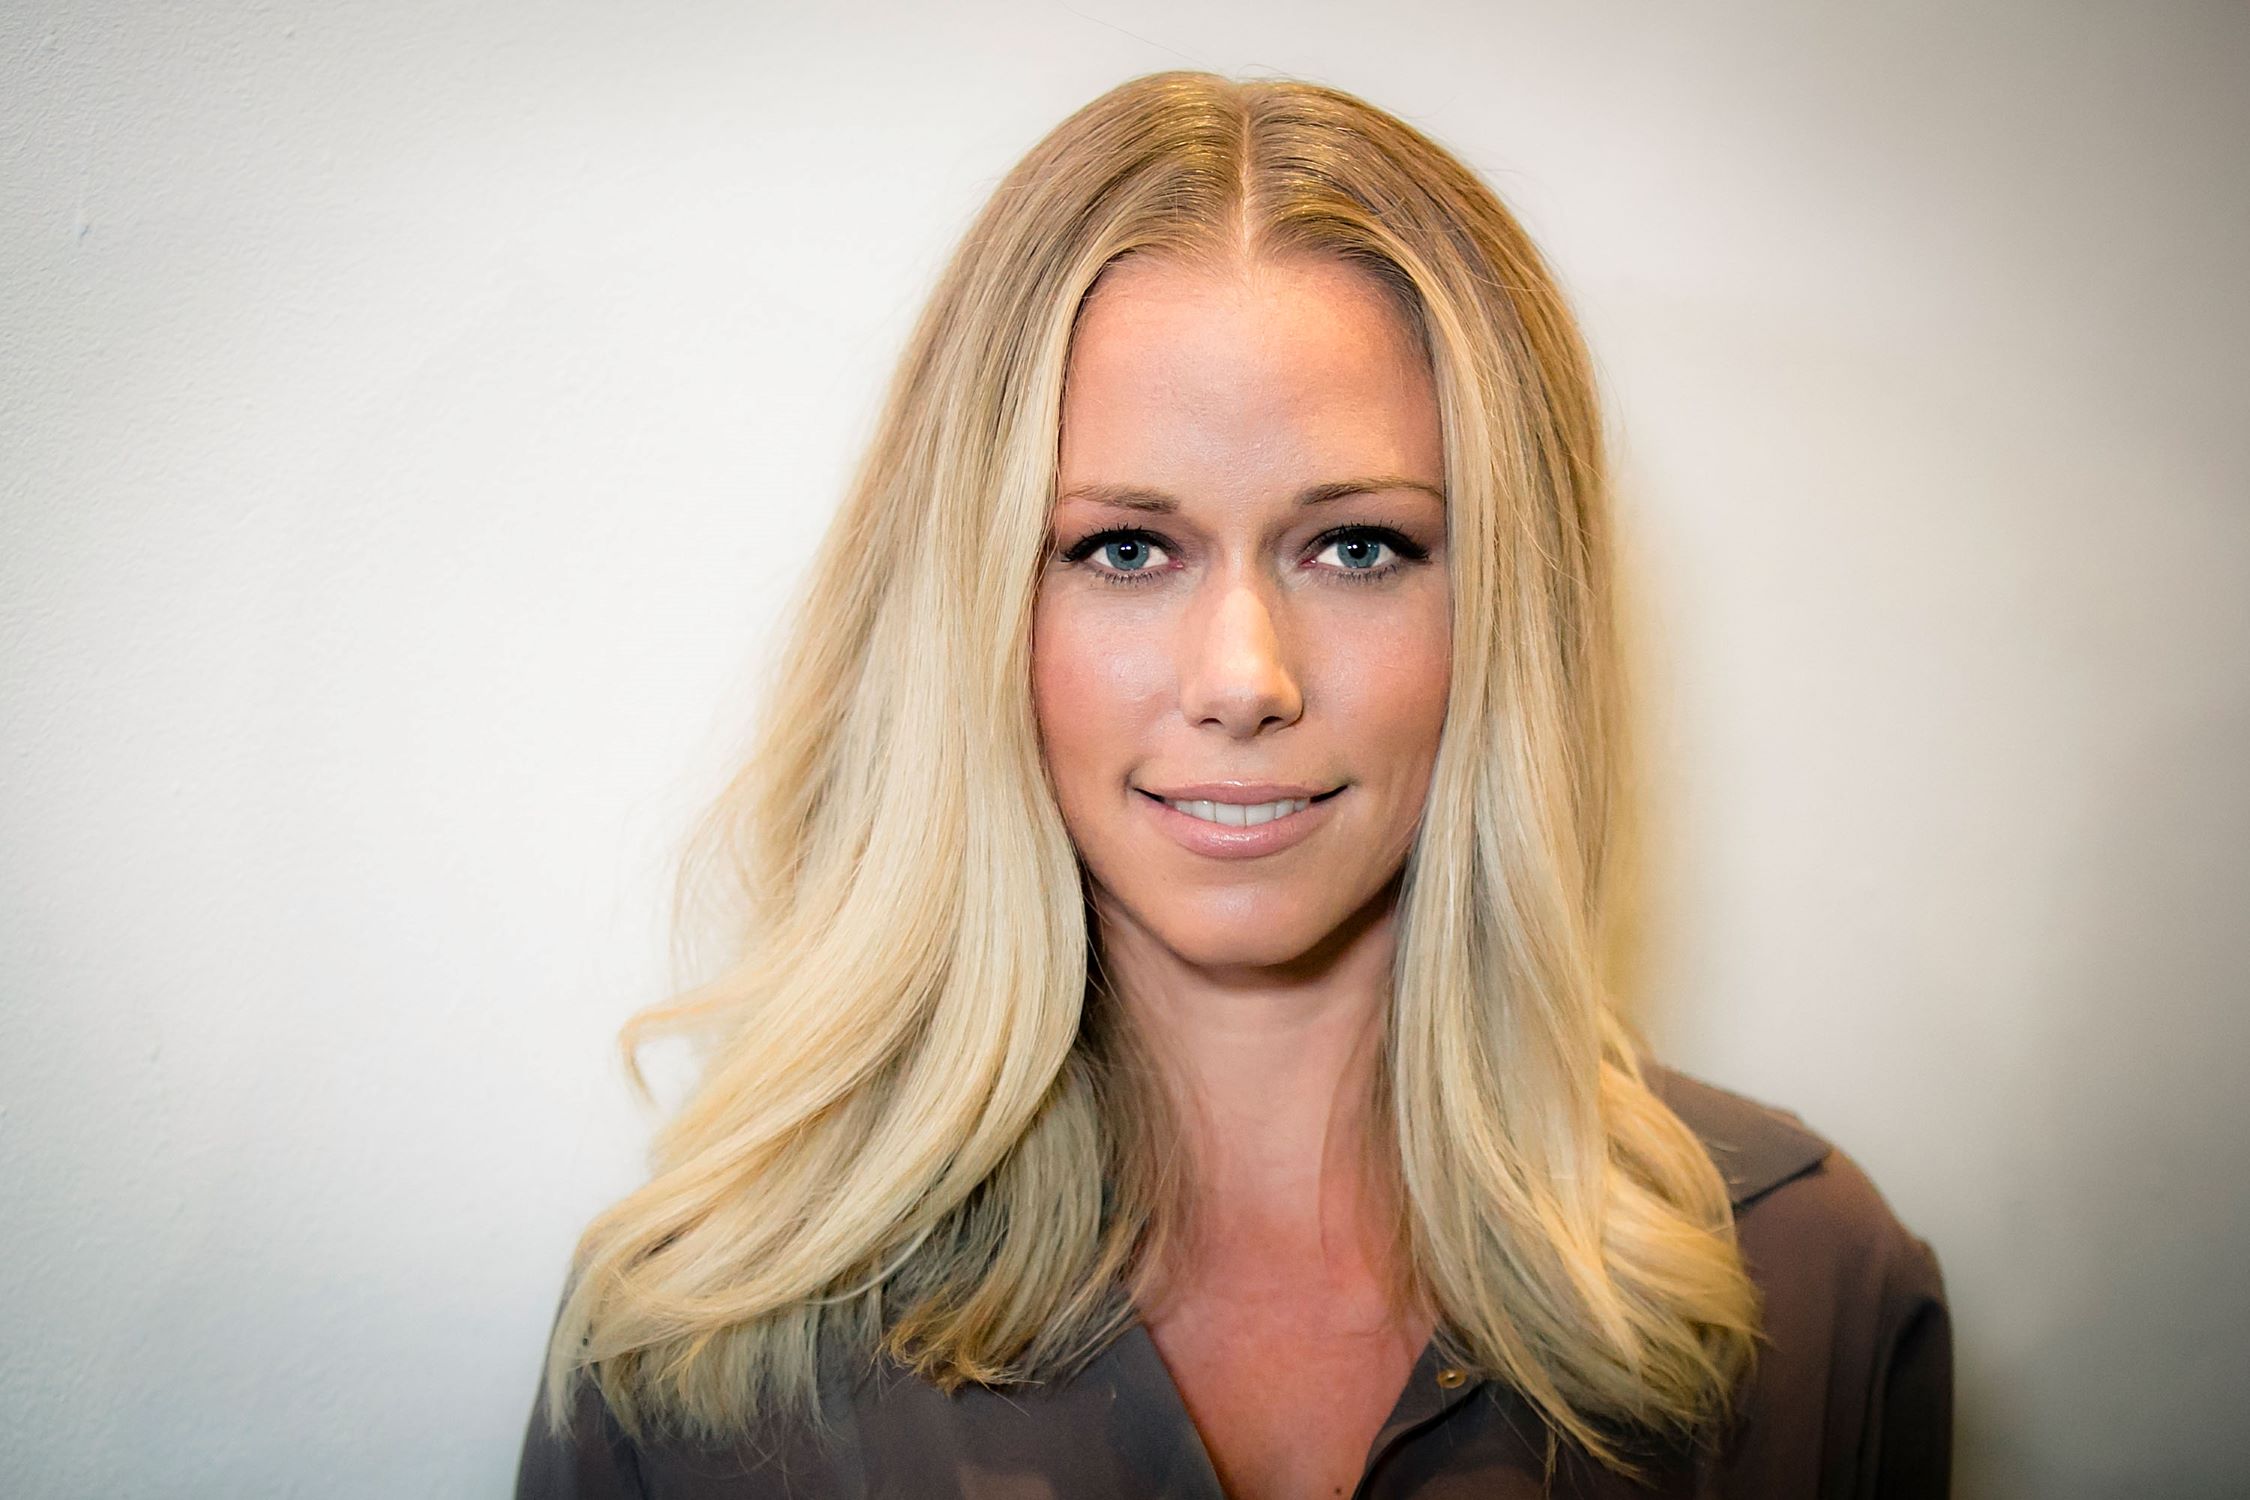 kendra-wilkinson-hospitalized-after-overwhelming-balancing-act